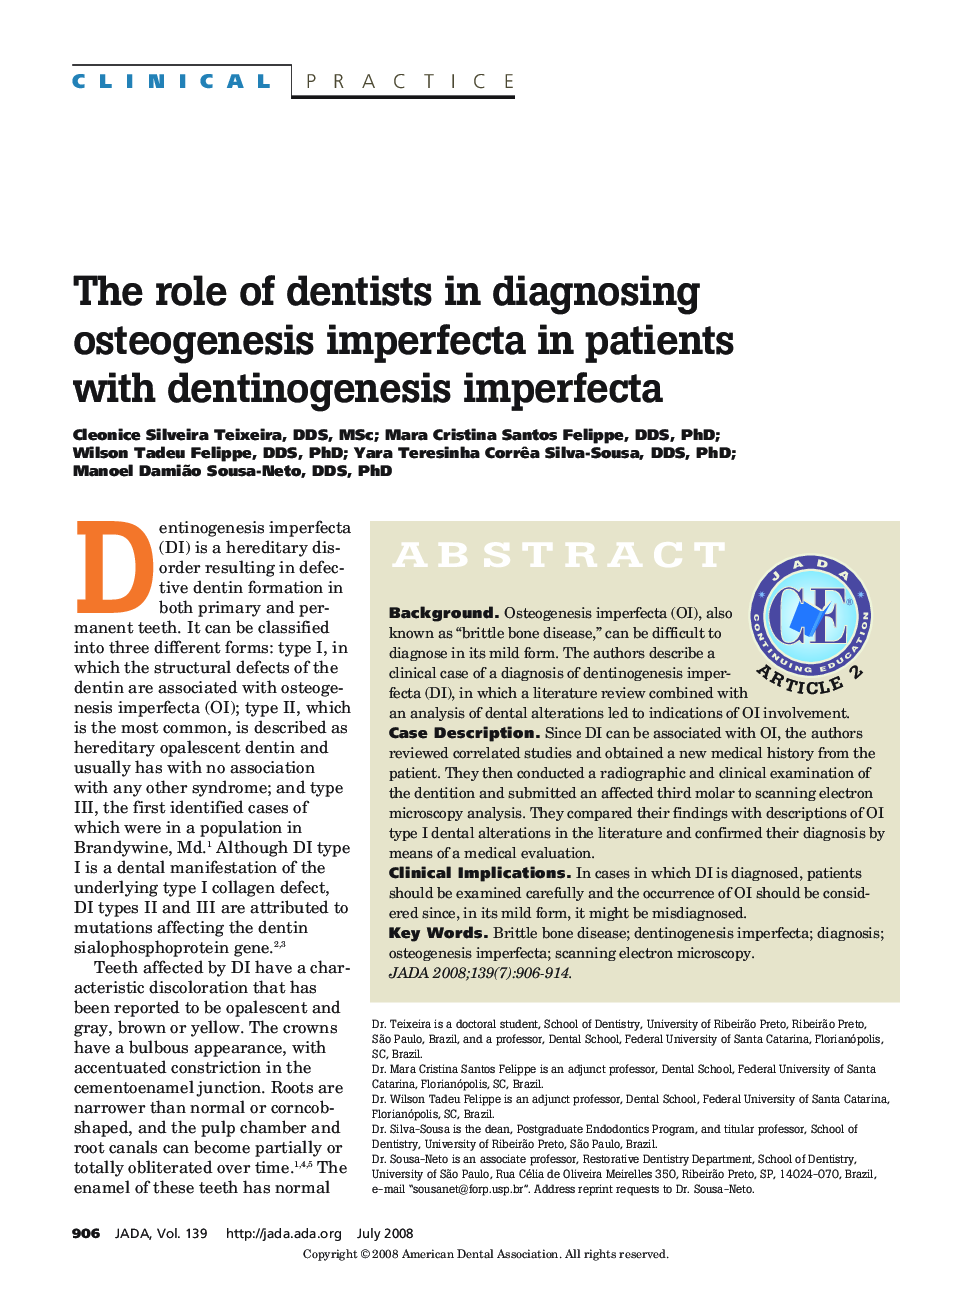 The Role of Dentists in Diagnosing Osteogenesis Imperfecta in Patients With Dentinogenesis Imperfecta